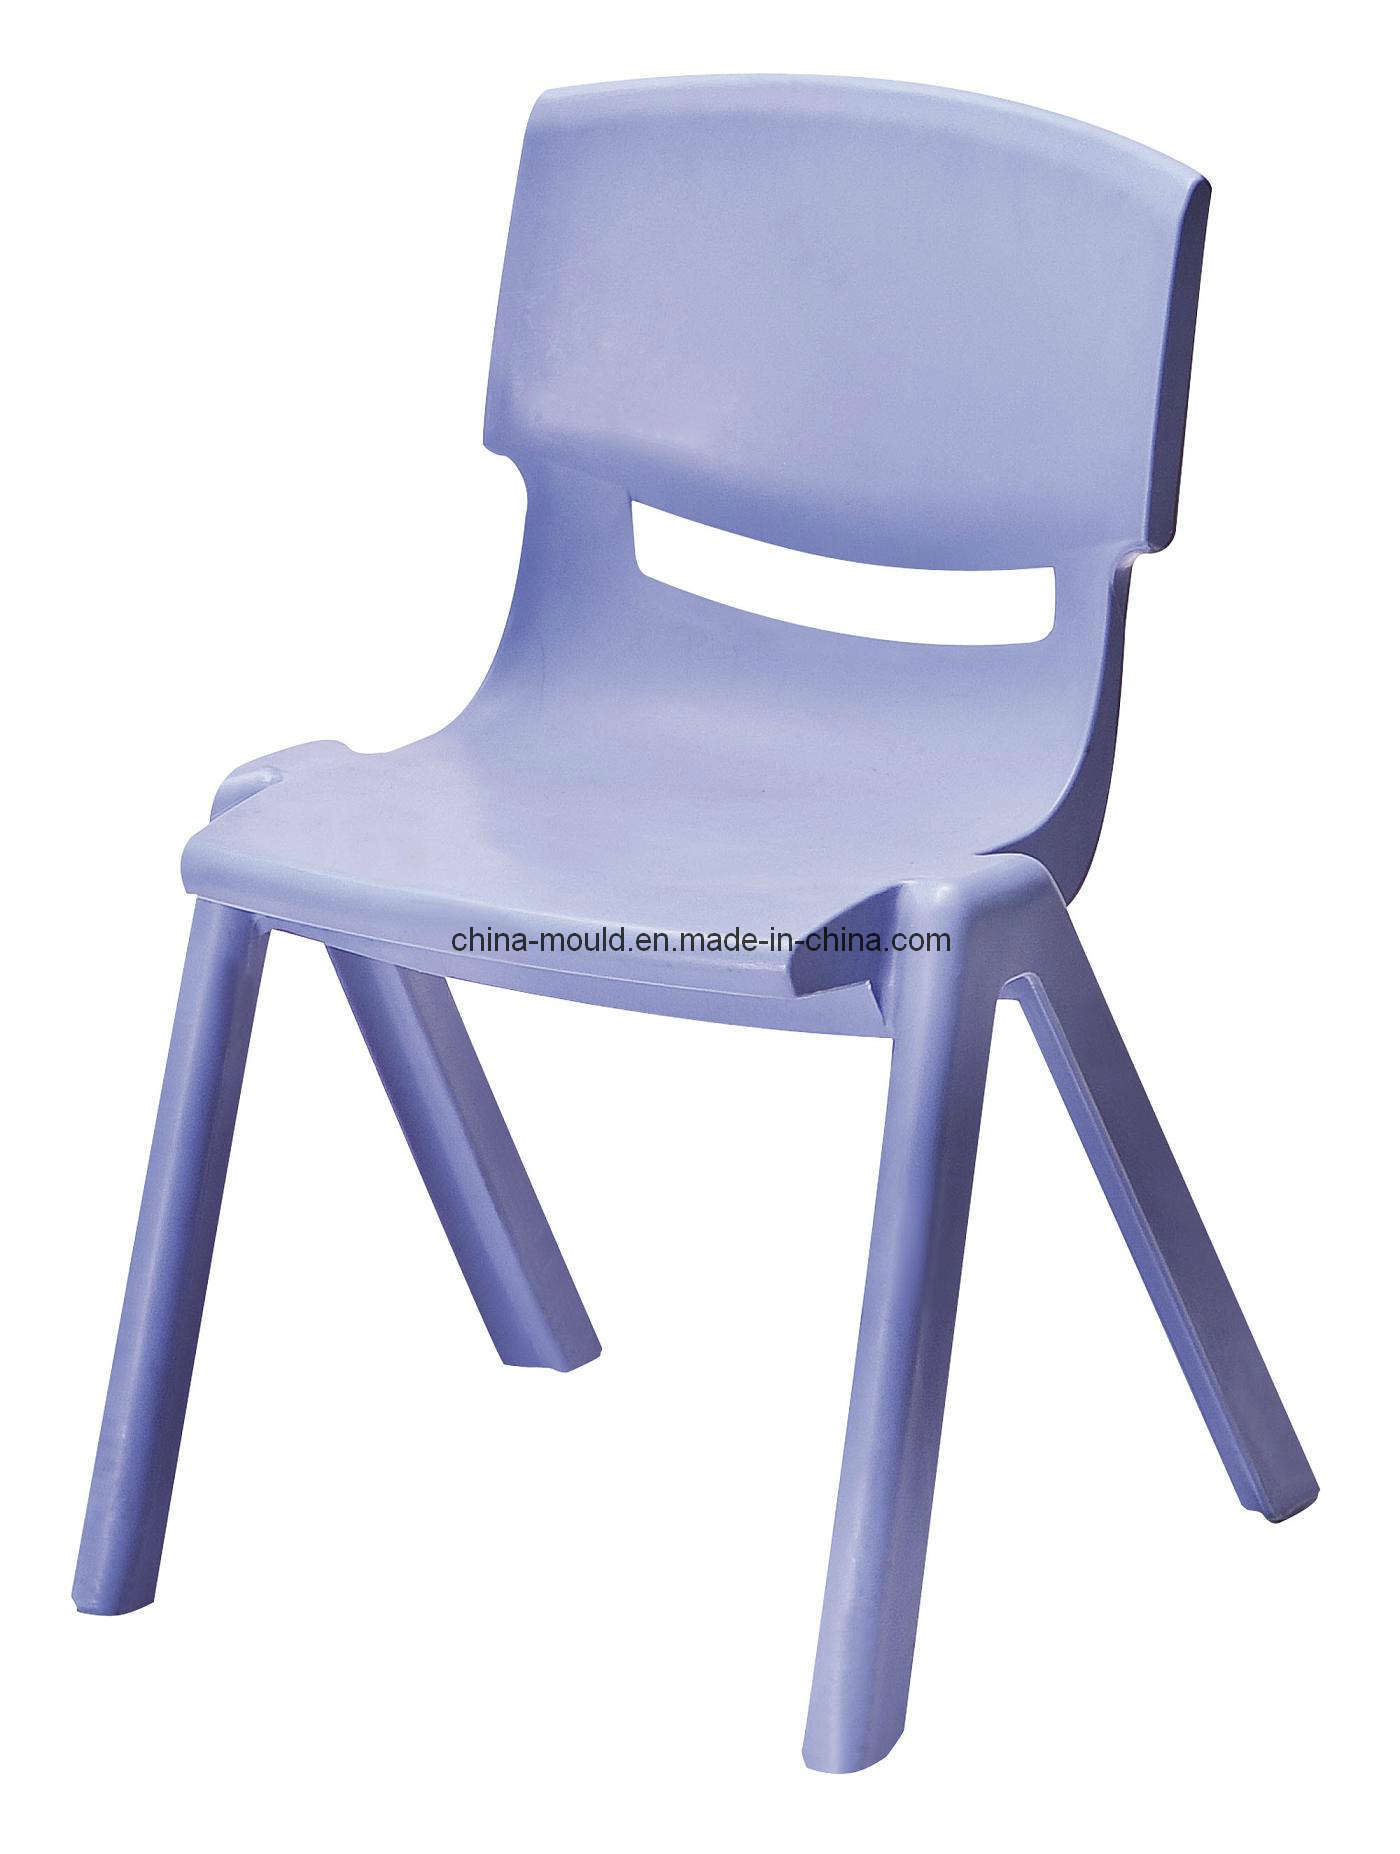 Chair Moulds (RK-22)